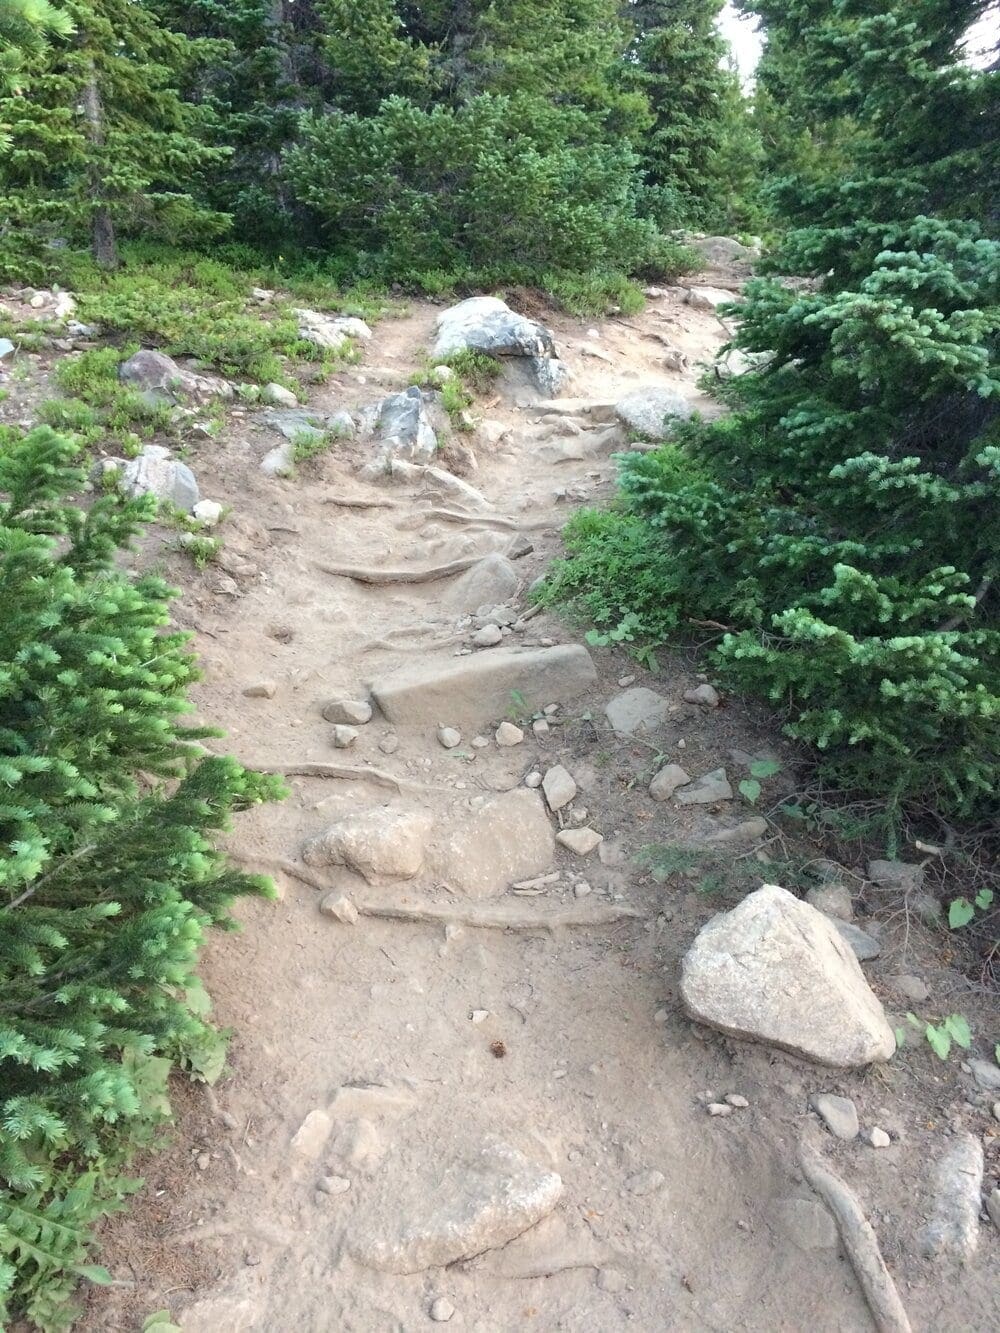 Photo 4. Around this area, the trail flattens out briefly and opens up, offering views east to Bald Mountain. Once you cross this flatter section, and cross a small wooden bridge, the summer trail begins an ascending traverse left (south) across a section of tiered wooden steps.